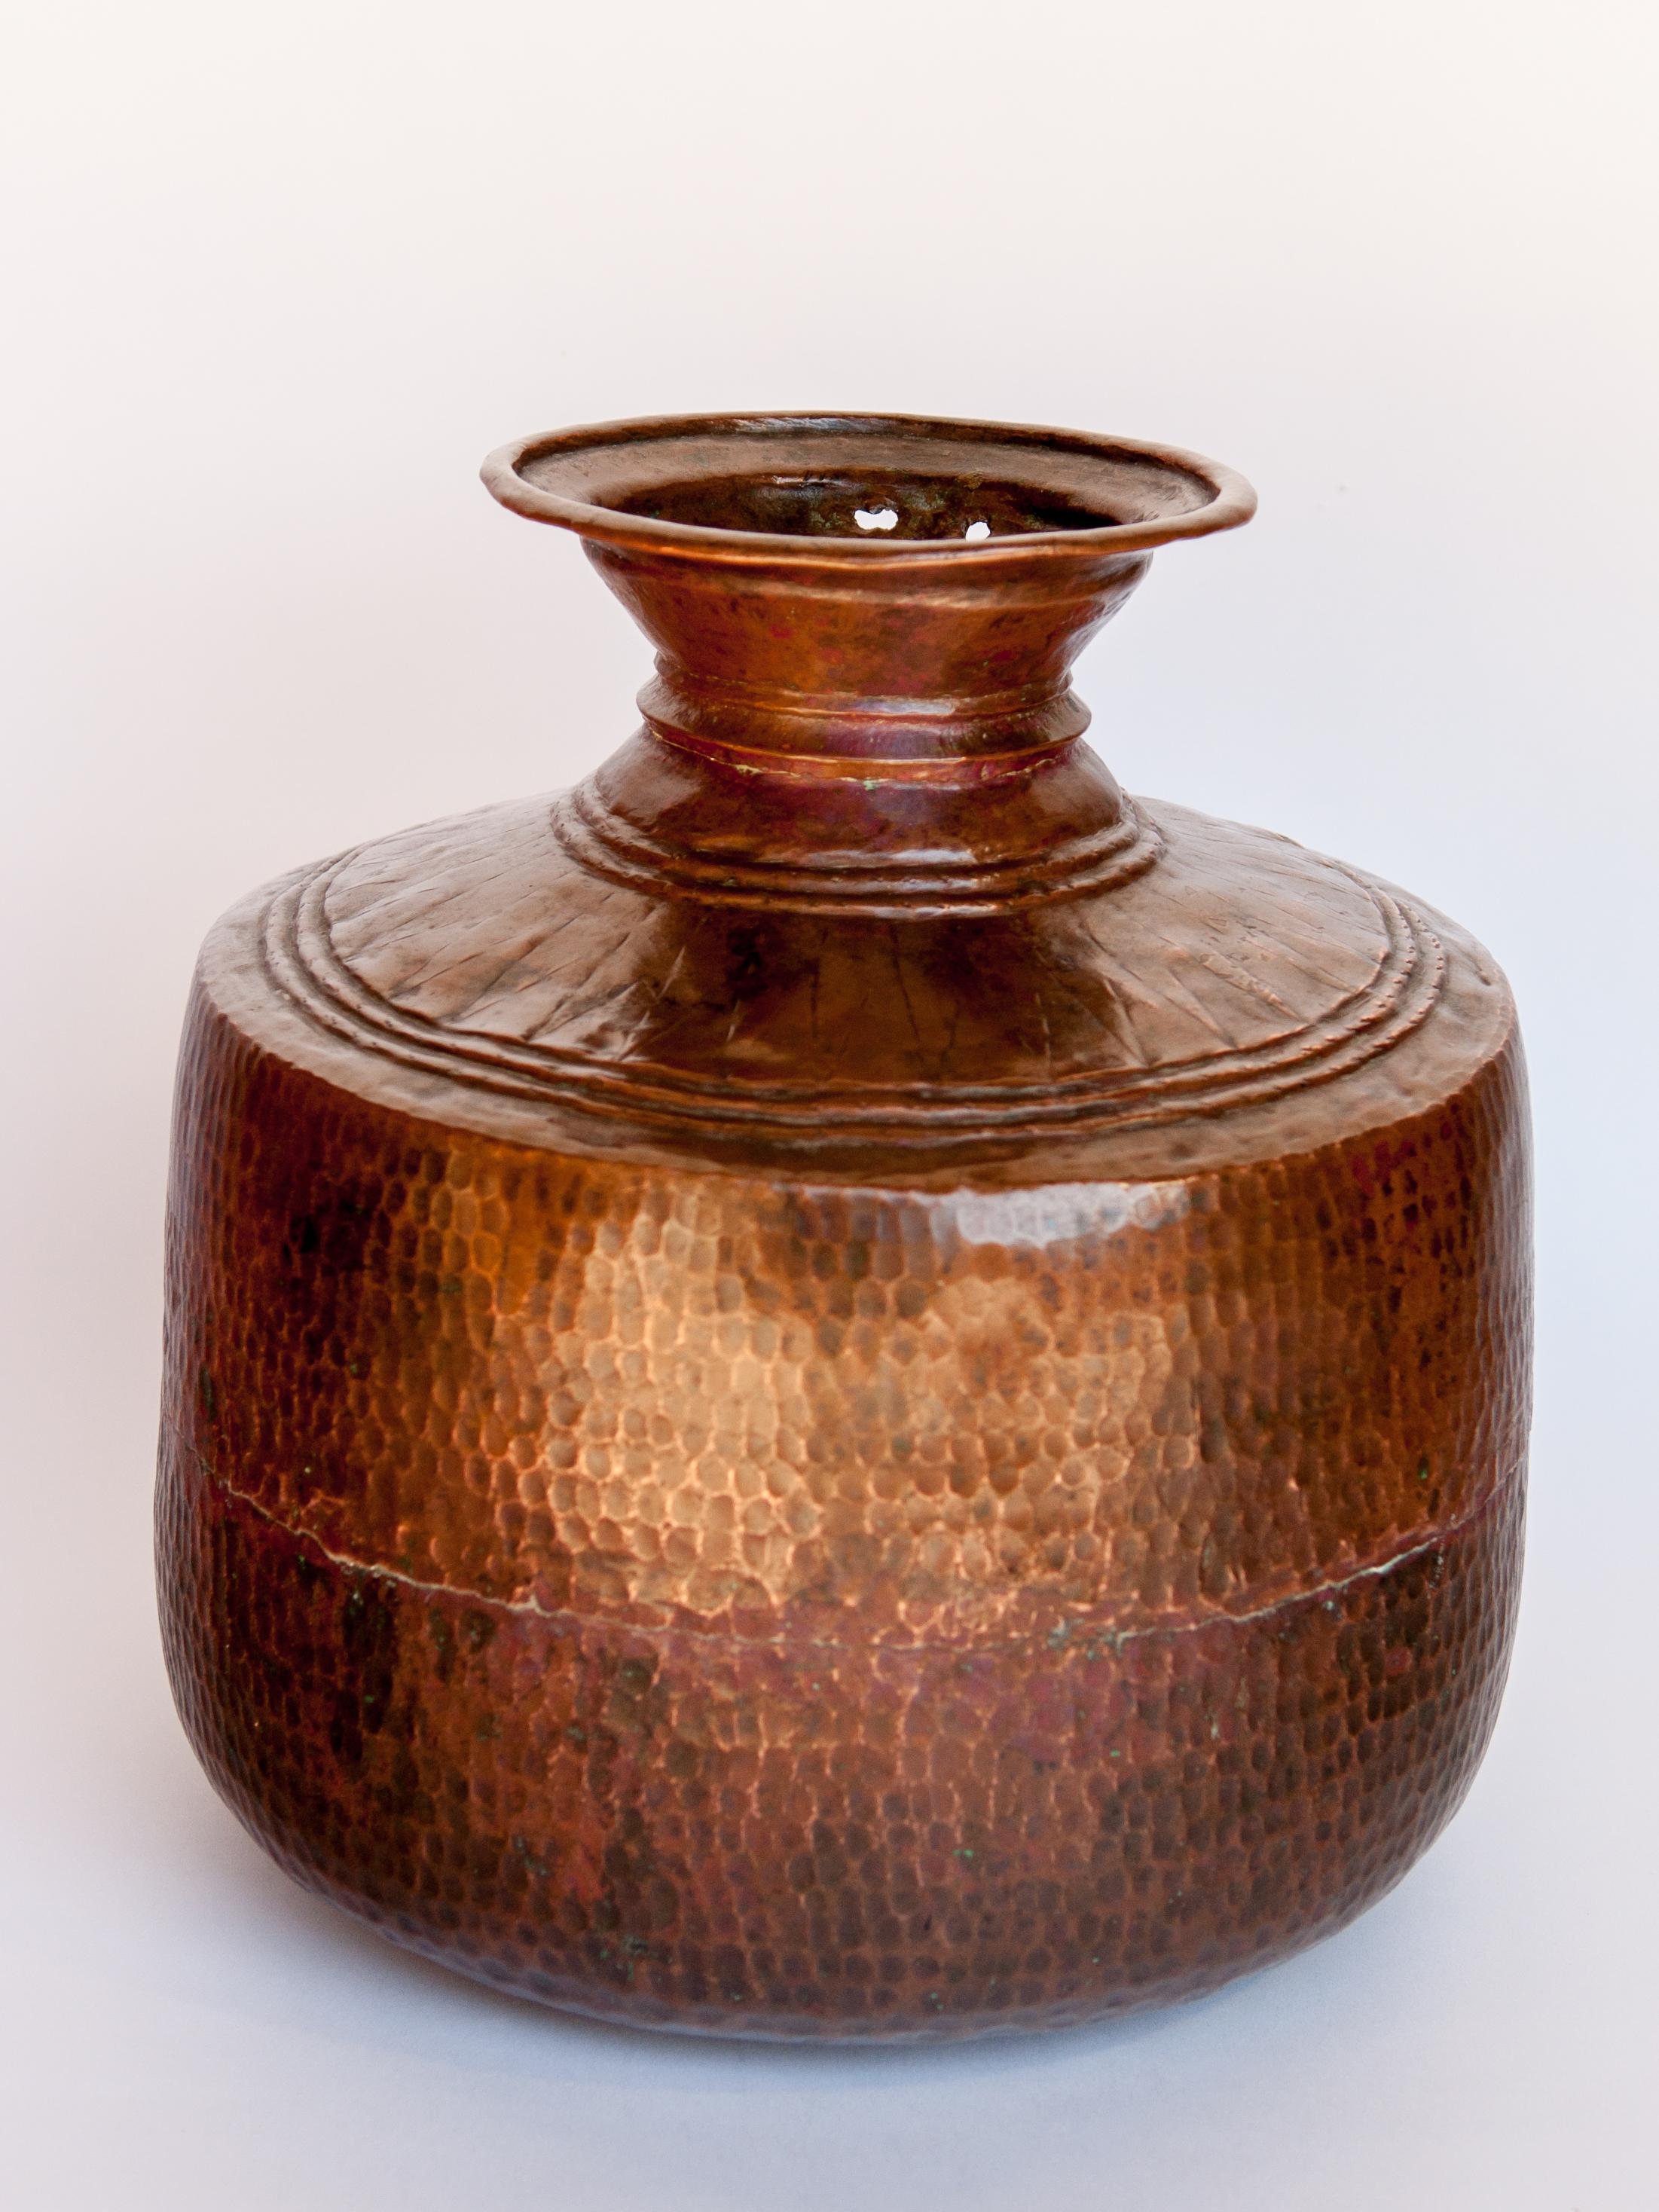 Vintage copper water pot, hand-hammered, from Nepal, mid-20th century.
Water pots such as this were ubiquitous throughout Nepal, in a variety of styles. They were used to transport and store water to and for the household. This piece has a lovely